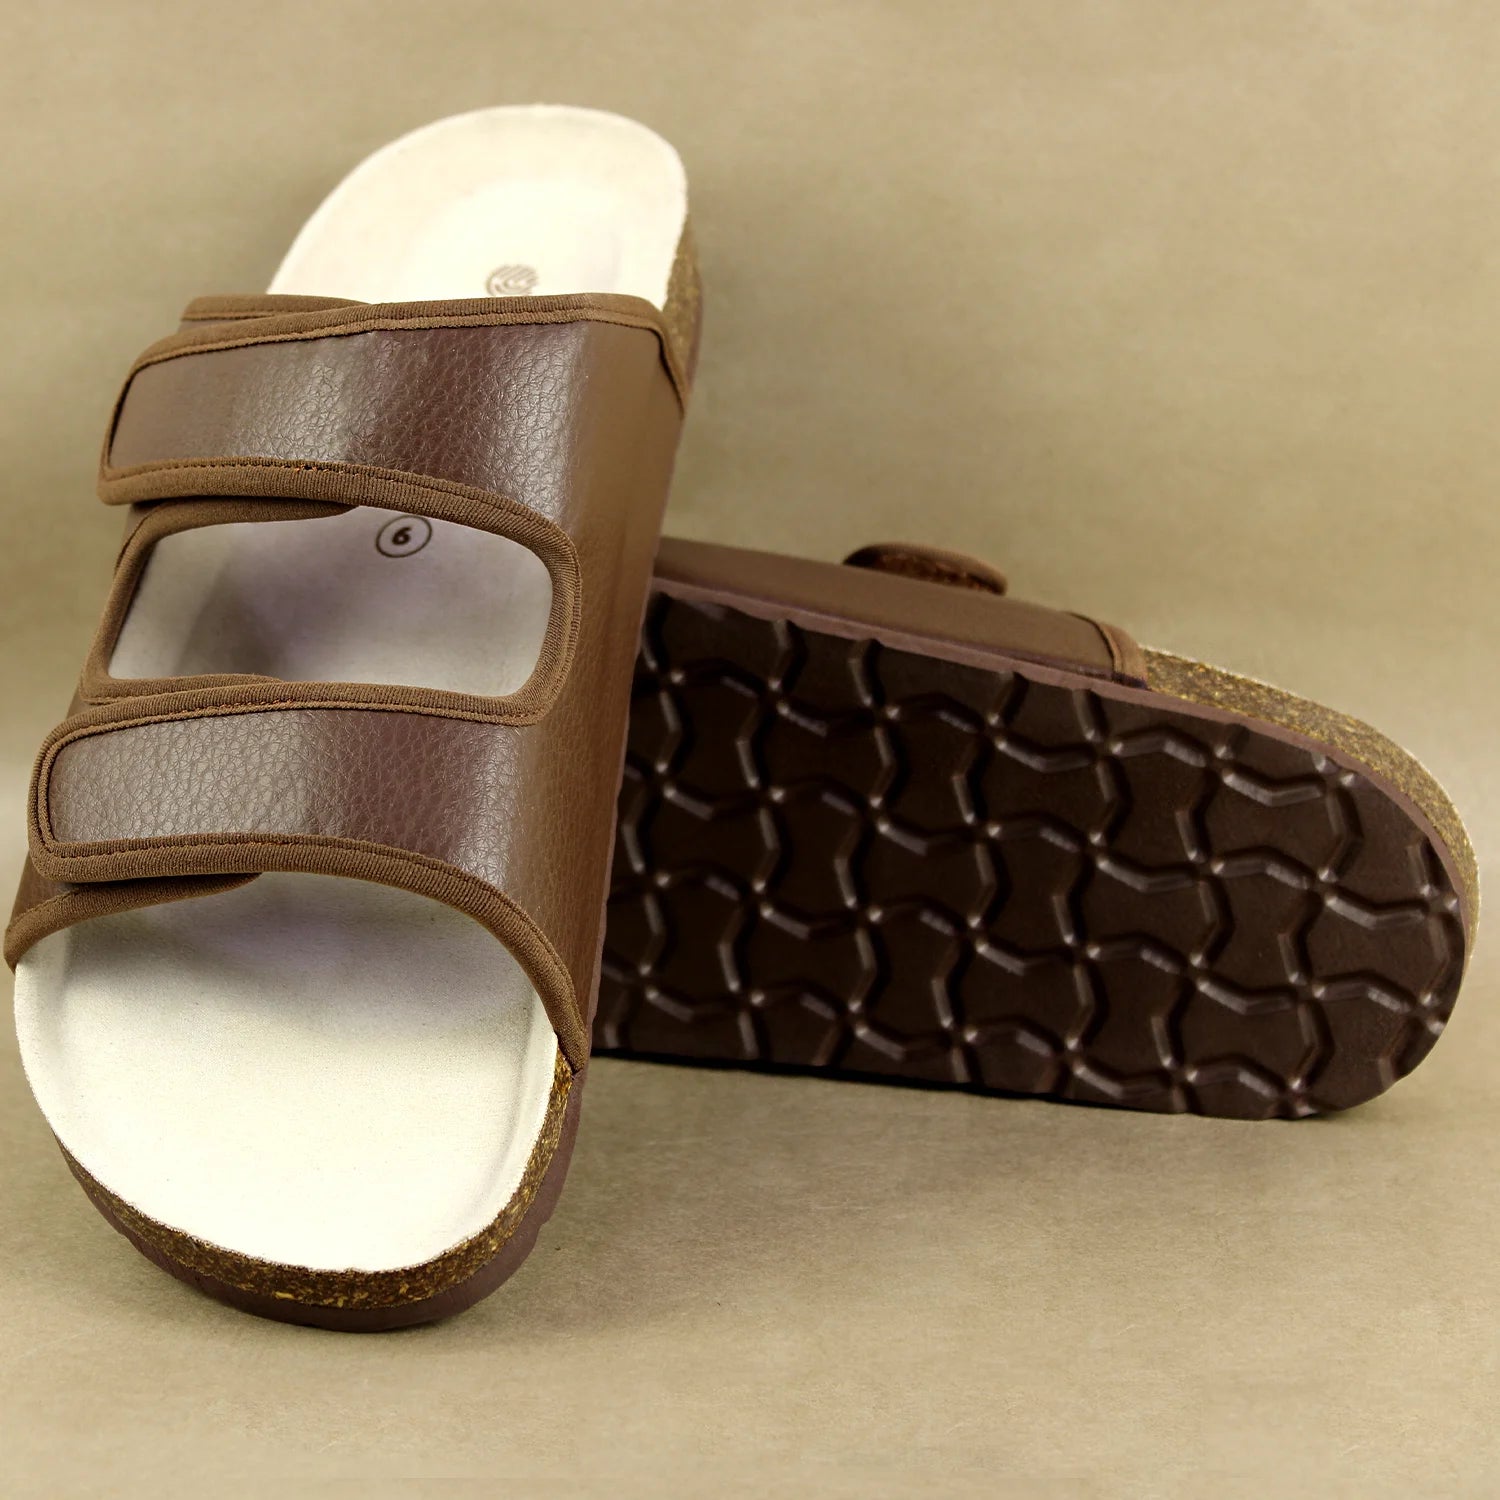 Comfortable Brown Cork Sandals for Men: Ideal for Senior Citizens and Daily Wear